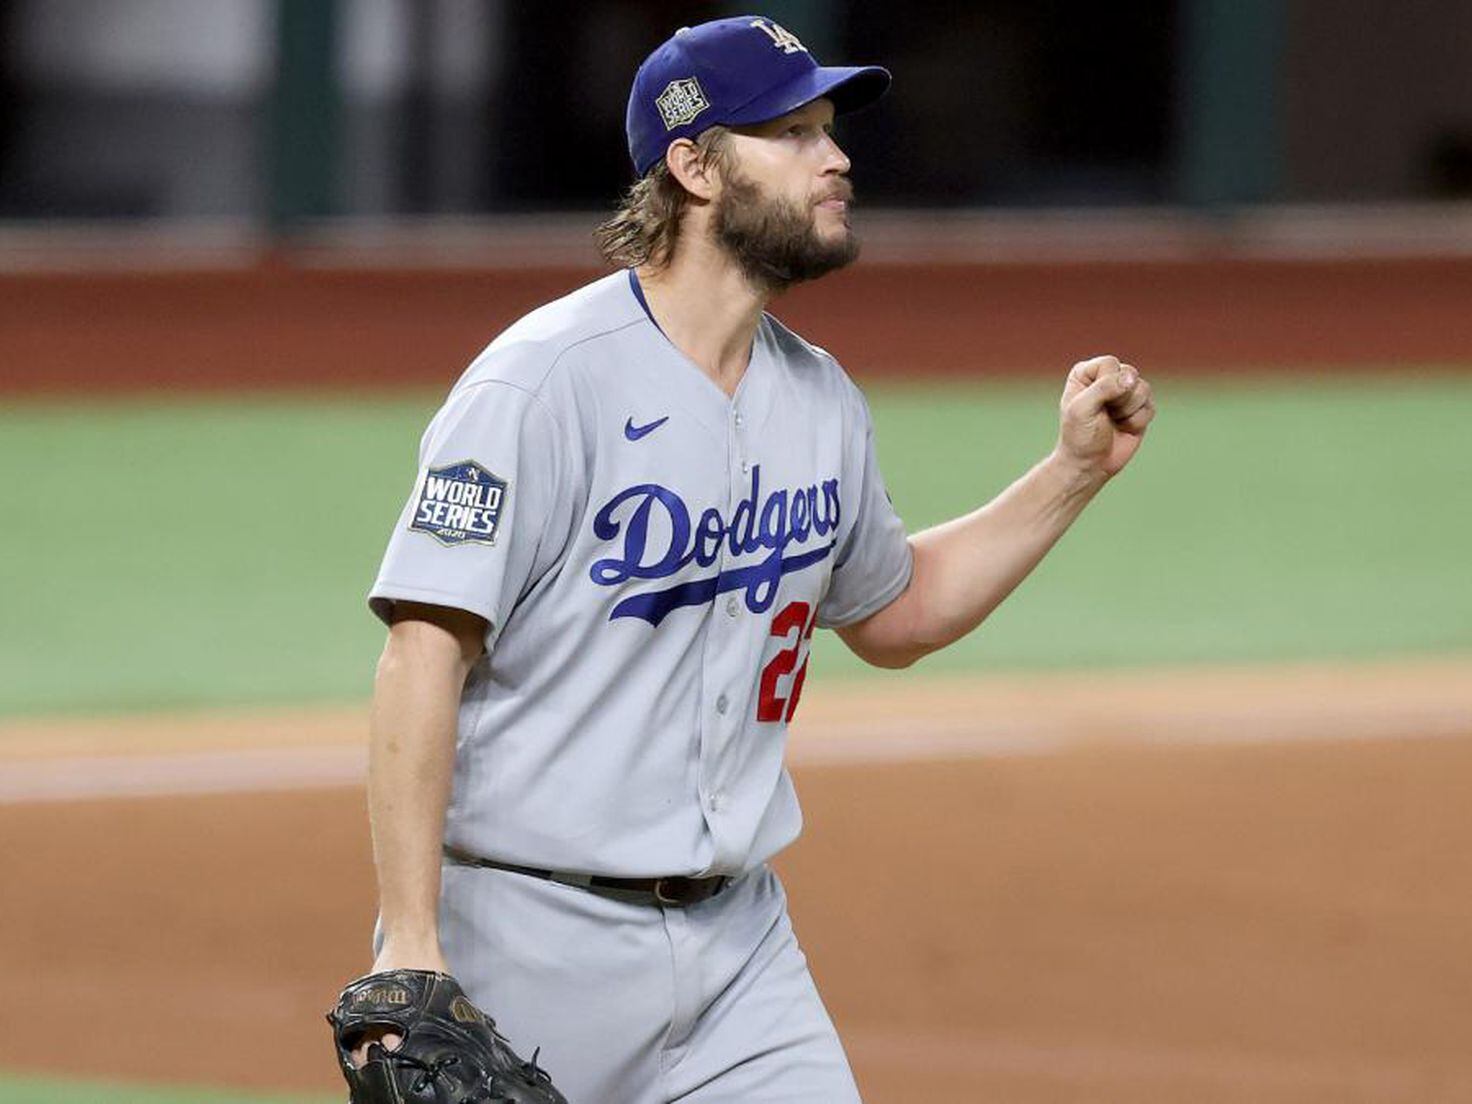 Dodgers news: Clayton Kershaw doesn't receive qualifying offer